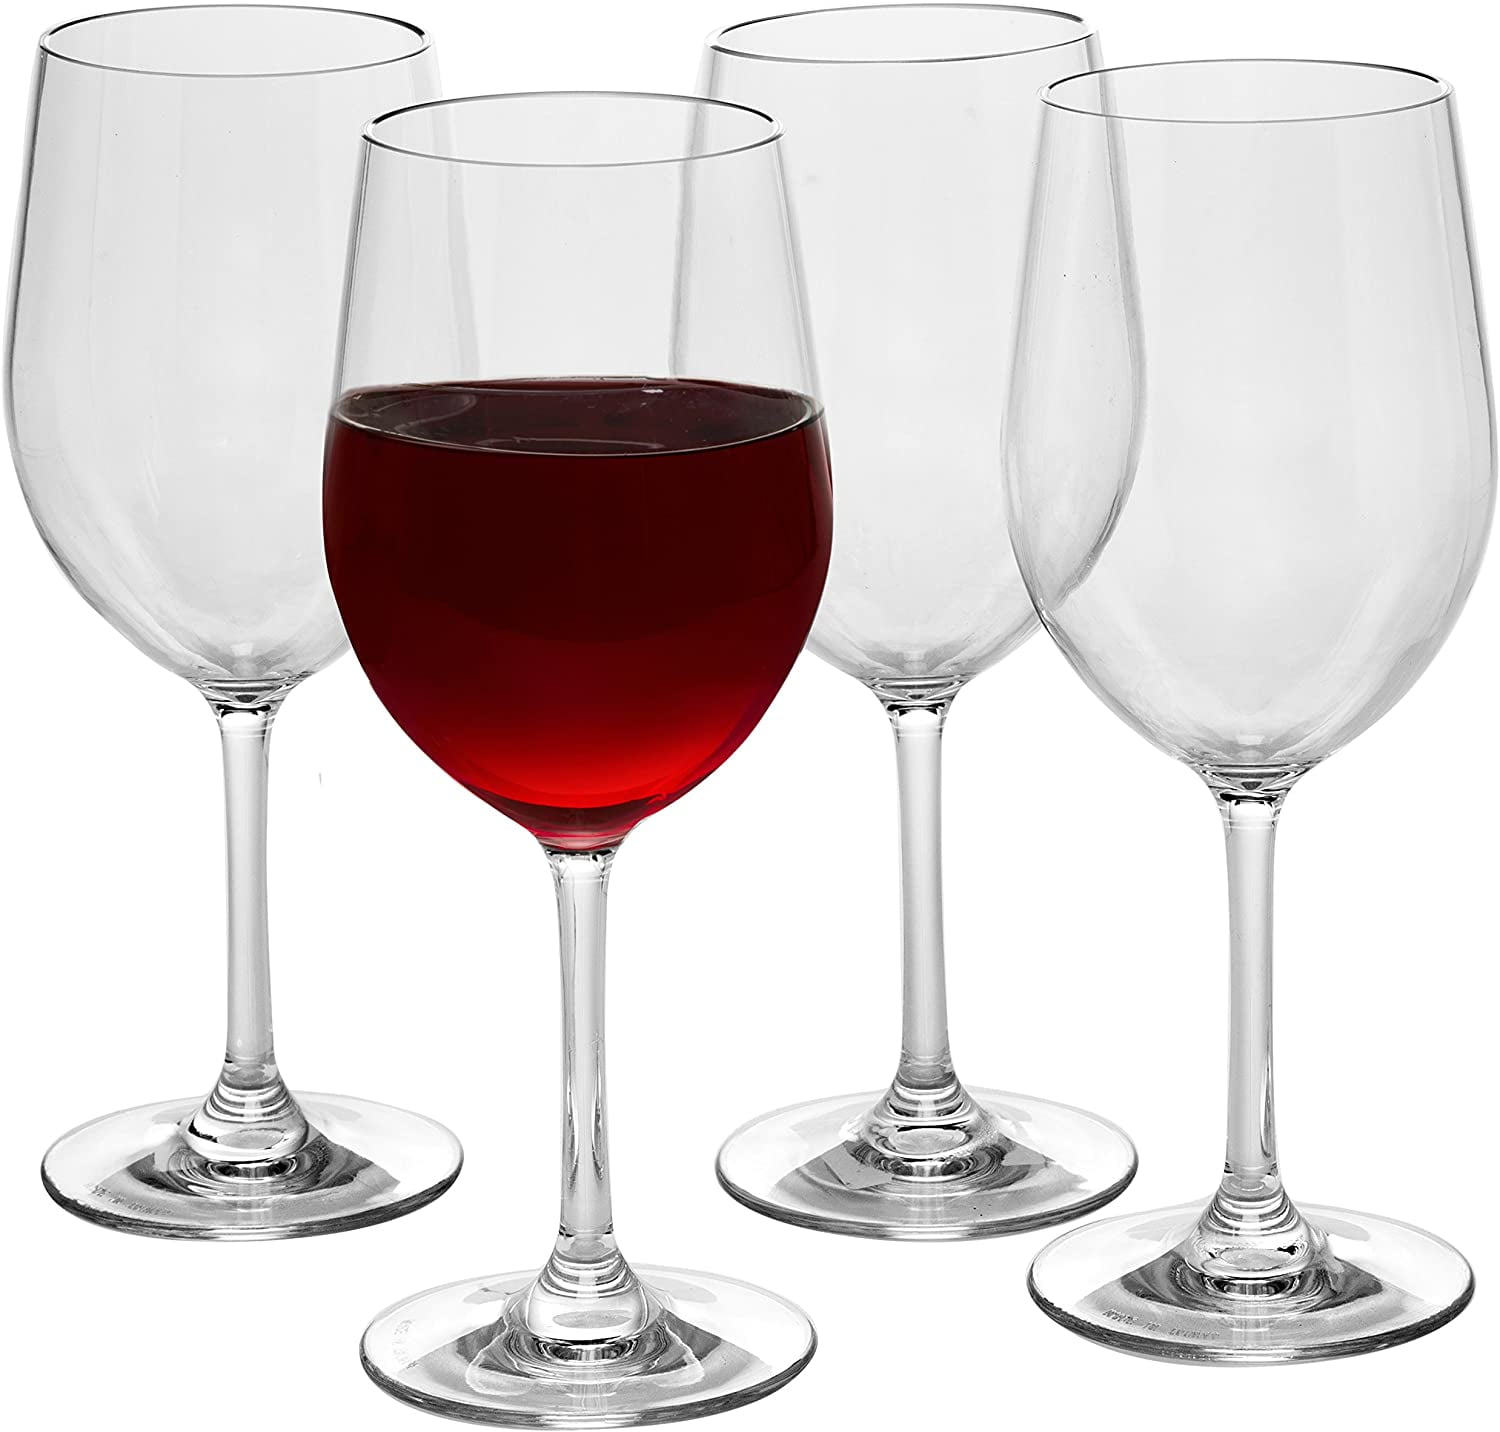 Stainless Steel Unbreakable Wine Glasses- Set of 2 Premium Quality 12 Ounce Wine Glasses